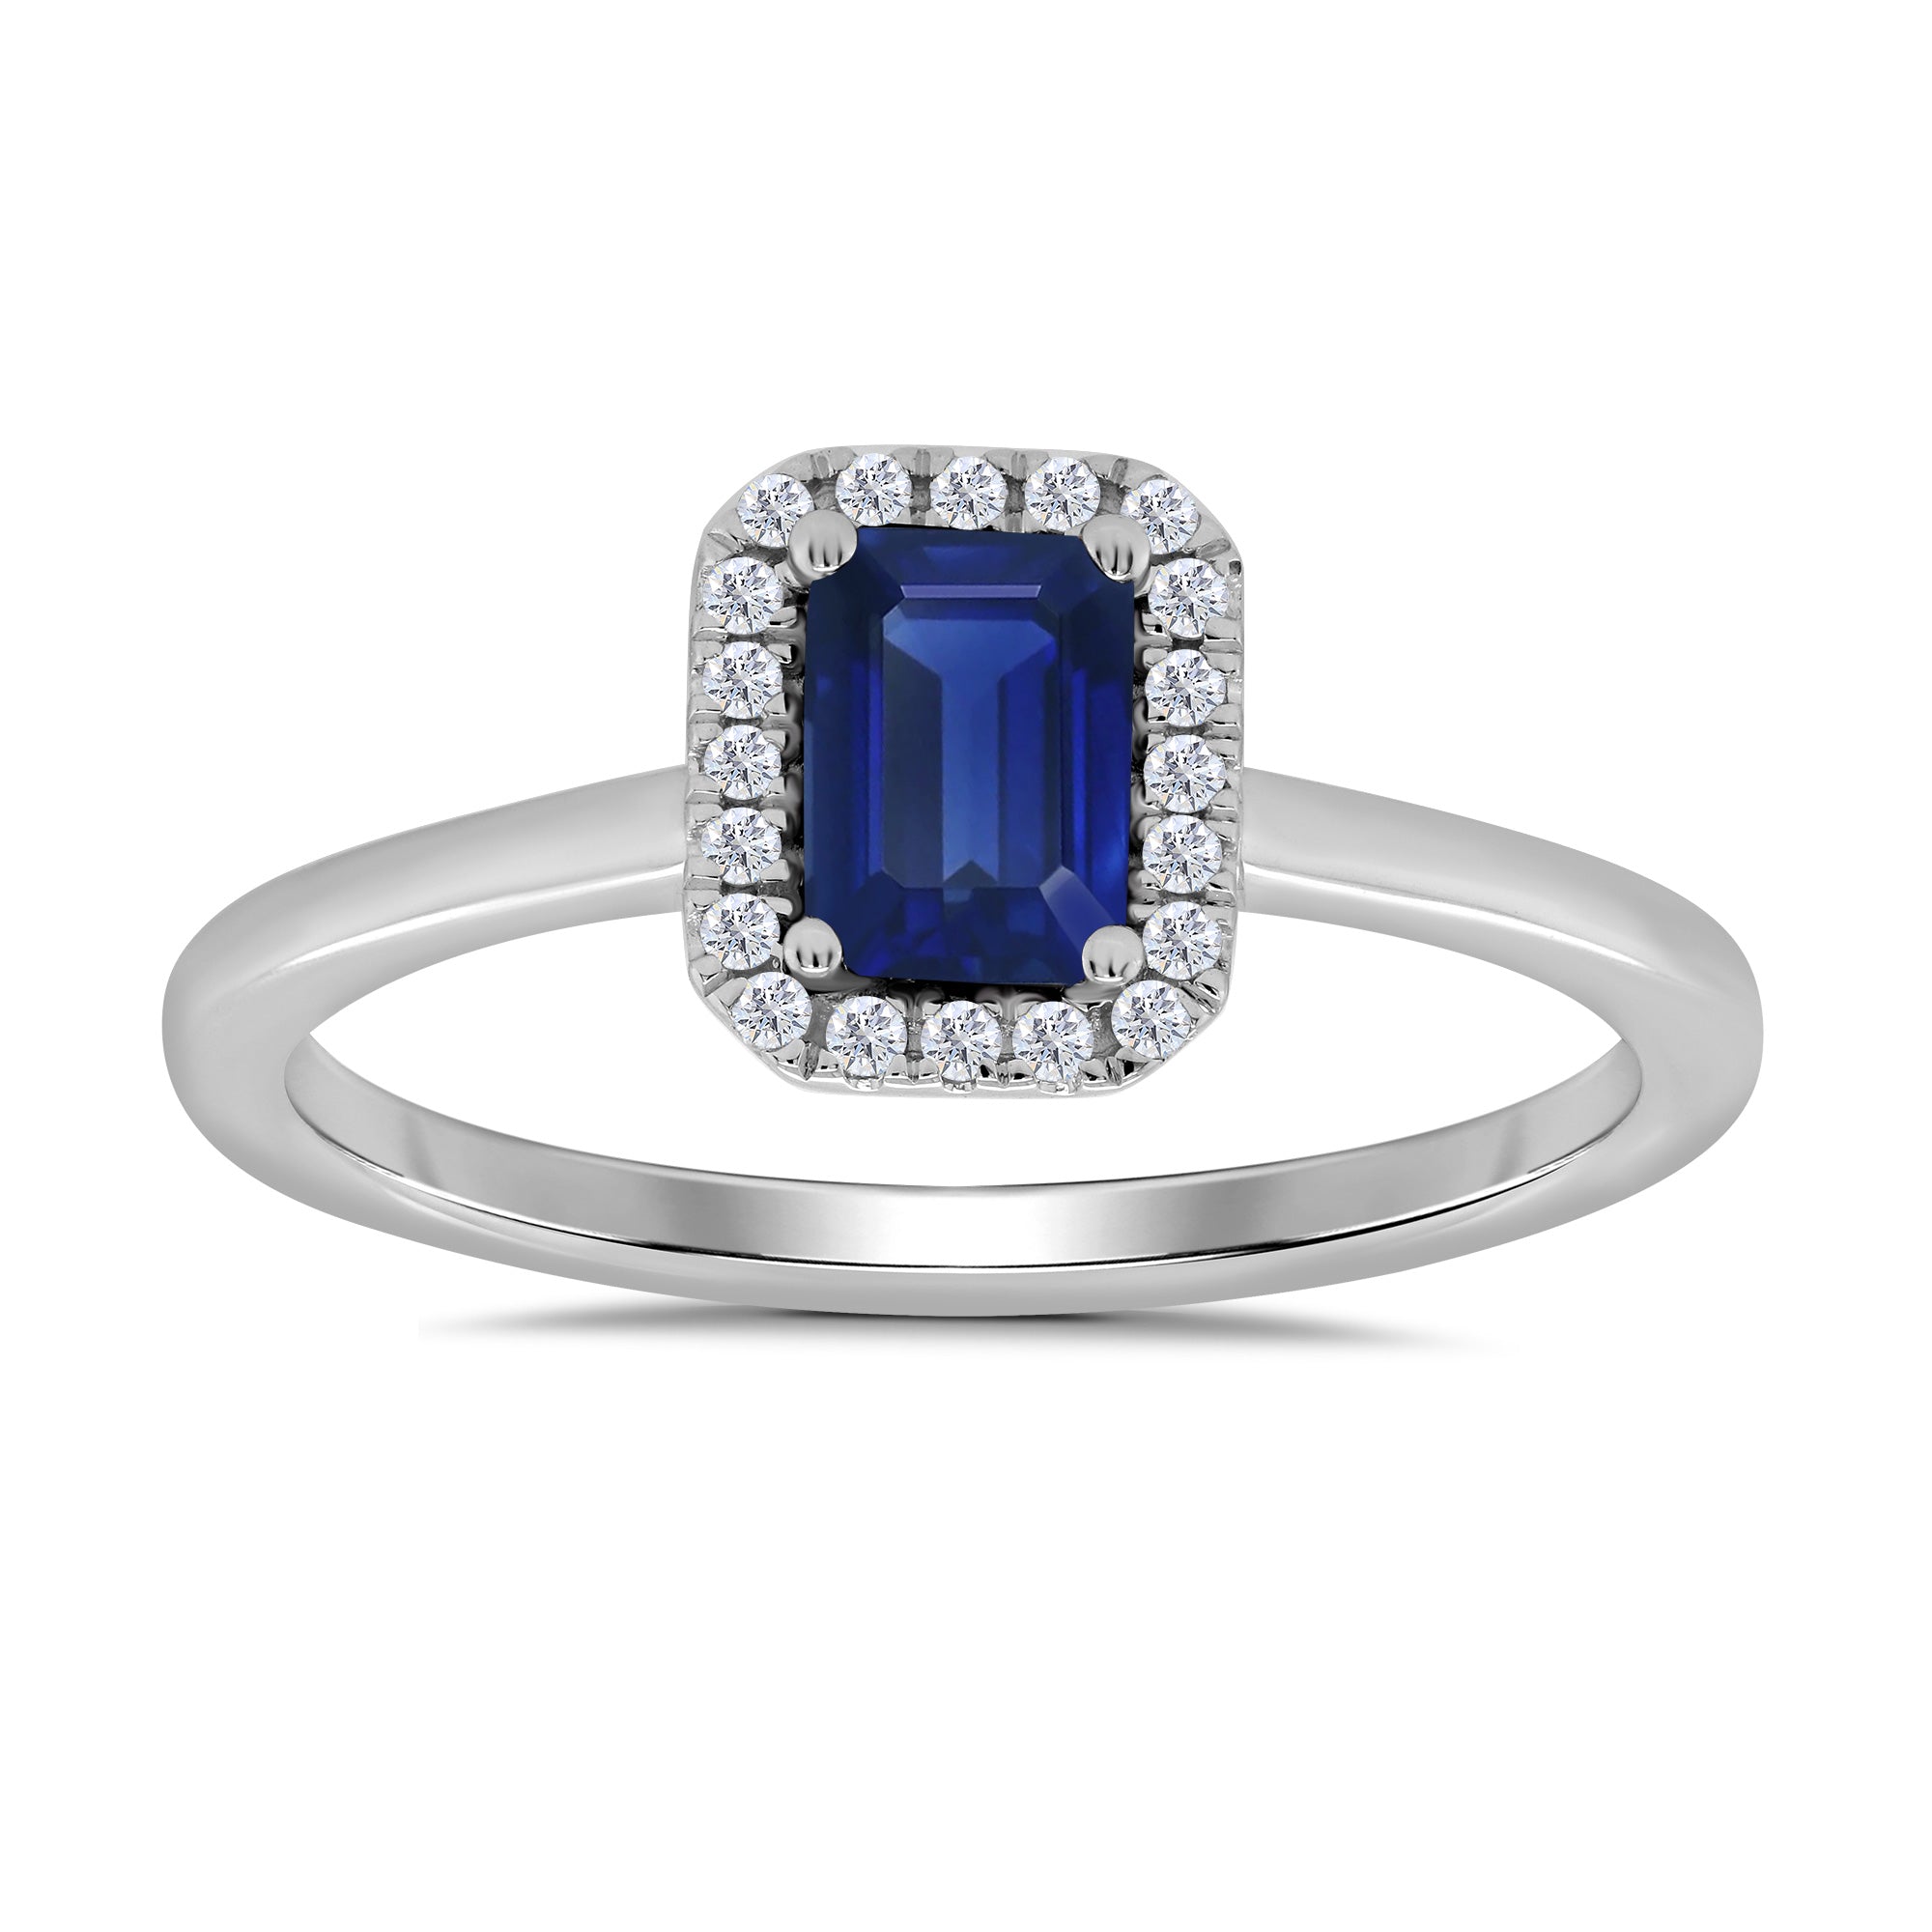 9ct white gold 6x4mm octagon cut sapphire & diamond cluster ring  0.10ct